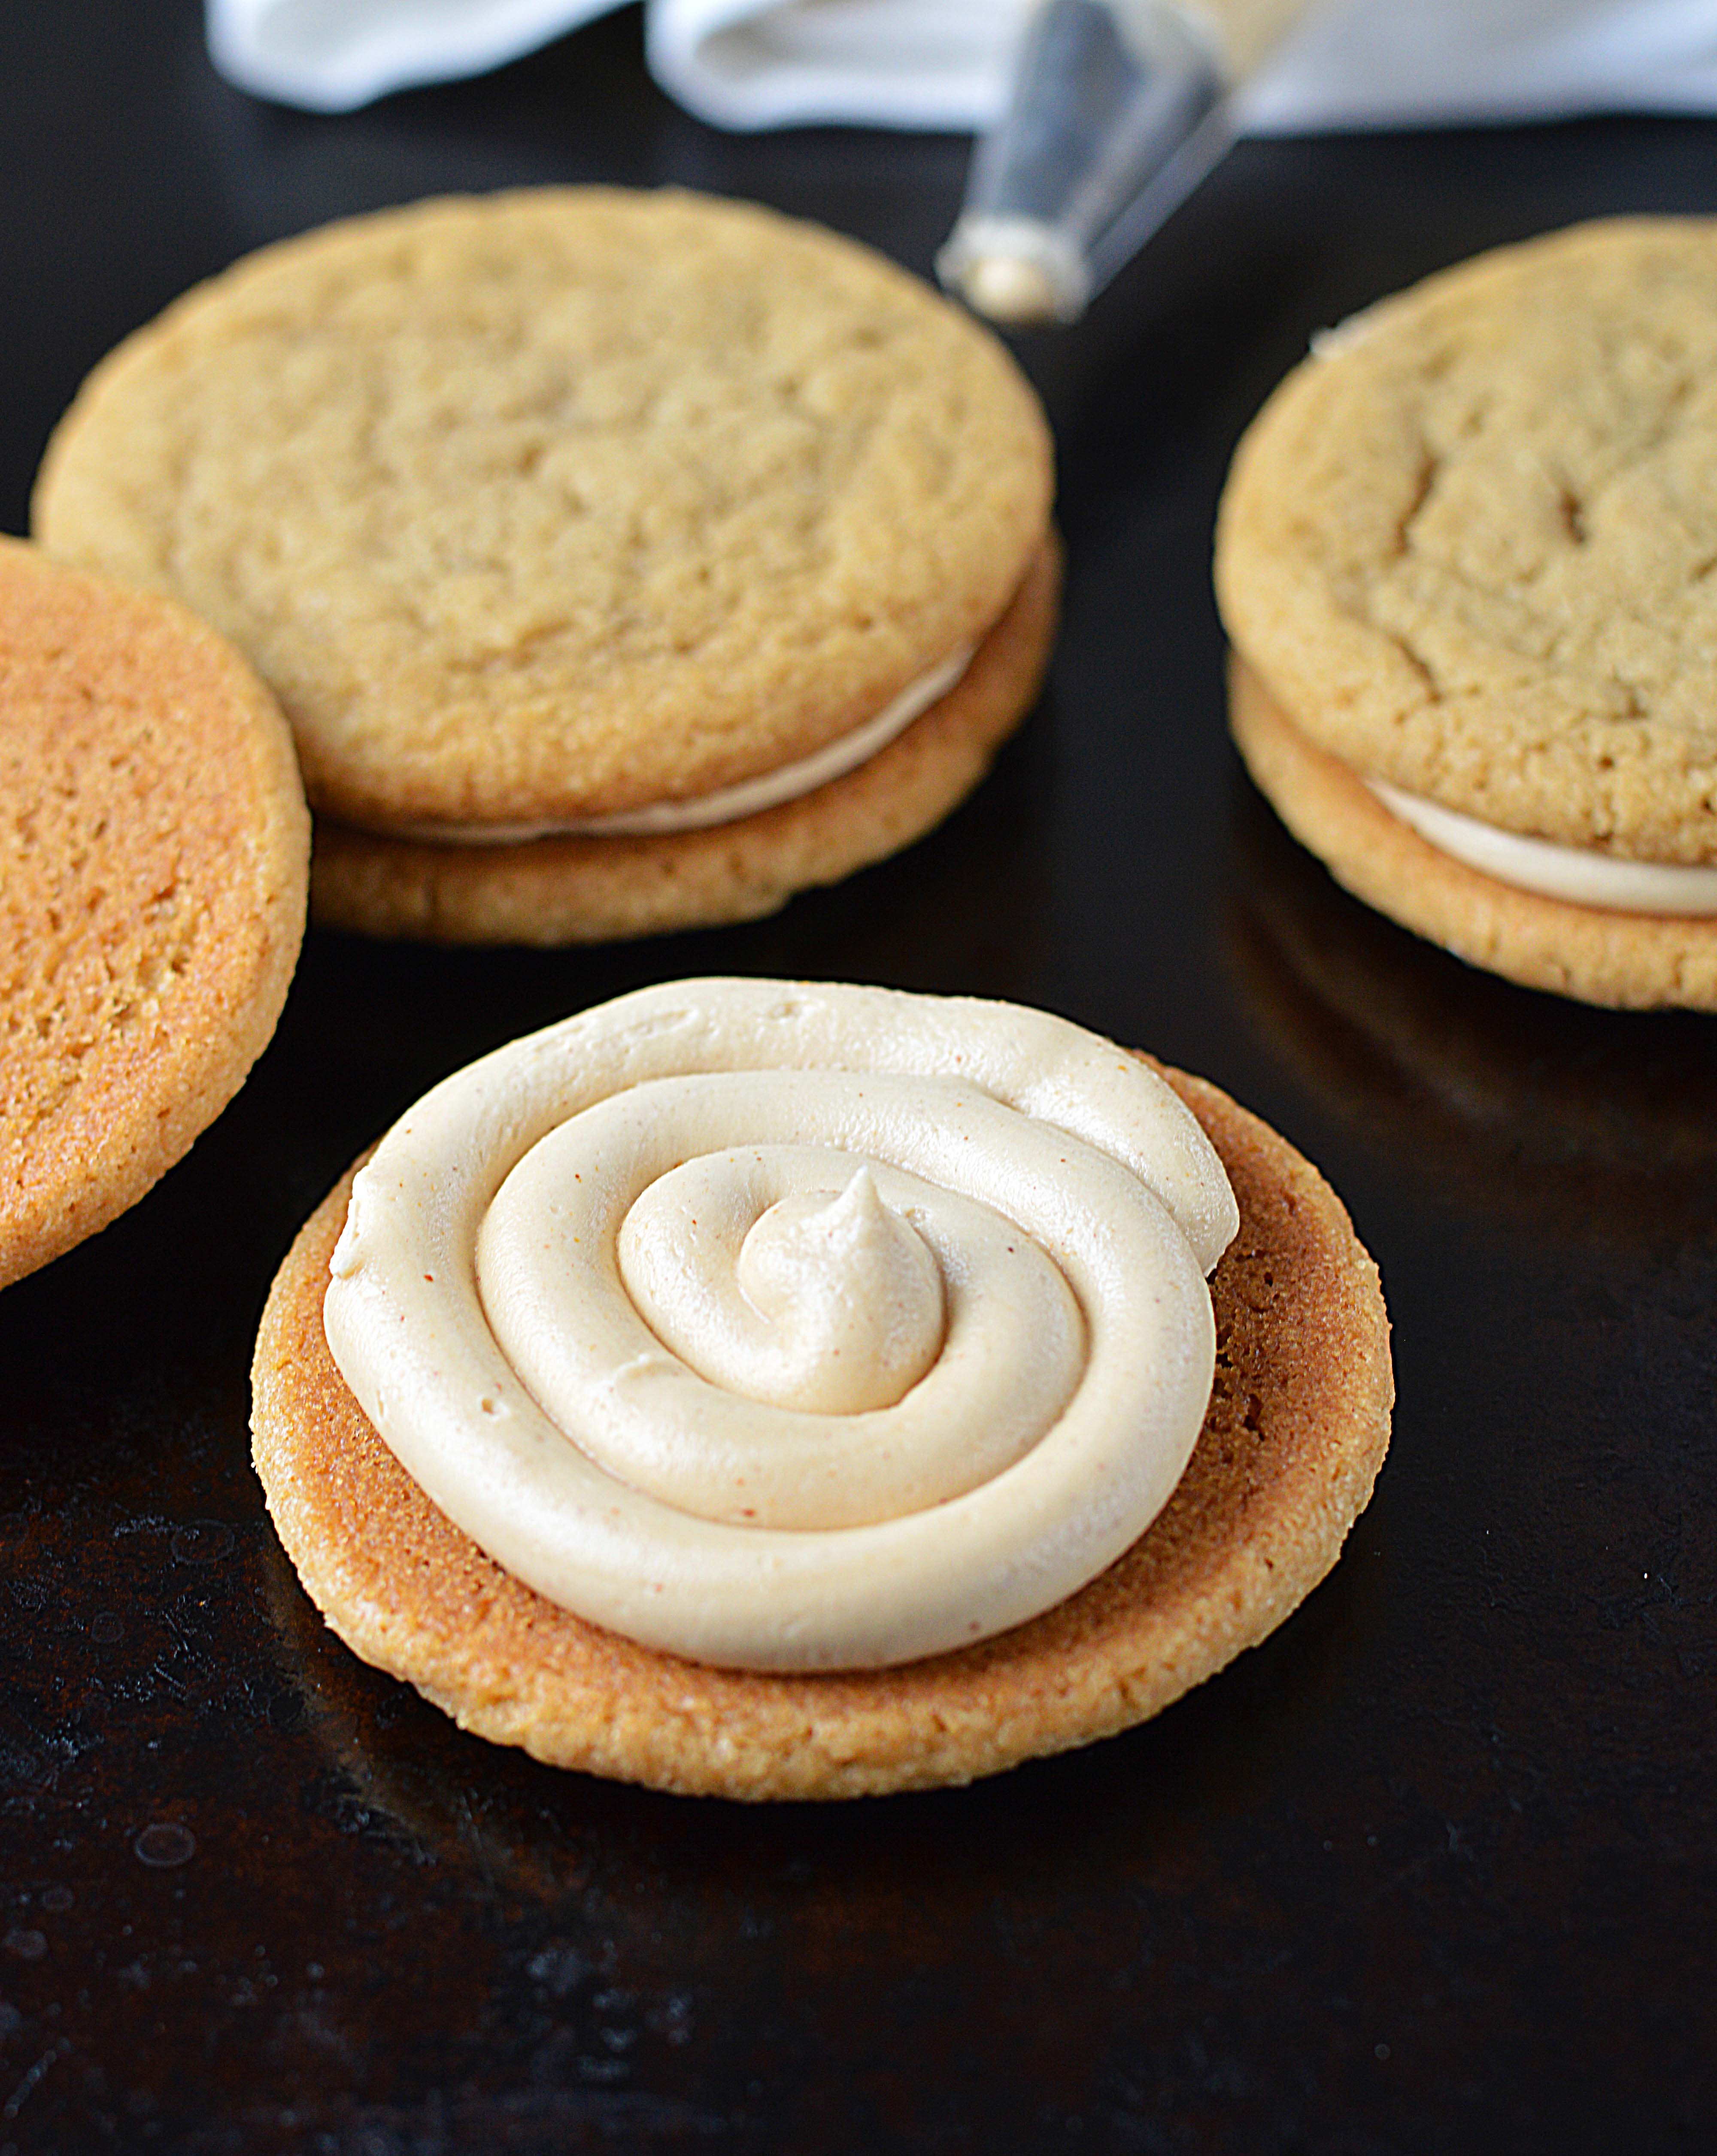 Peanut butter sandwich cookies - Friday is Cake Night